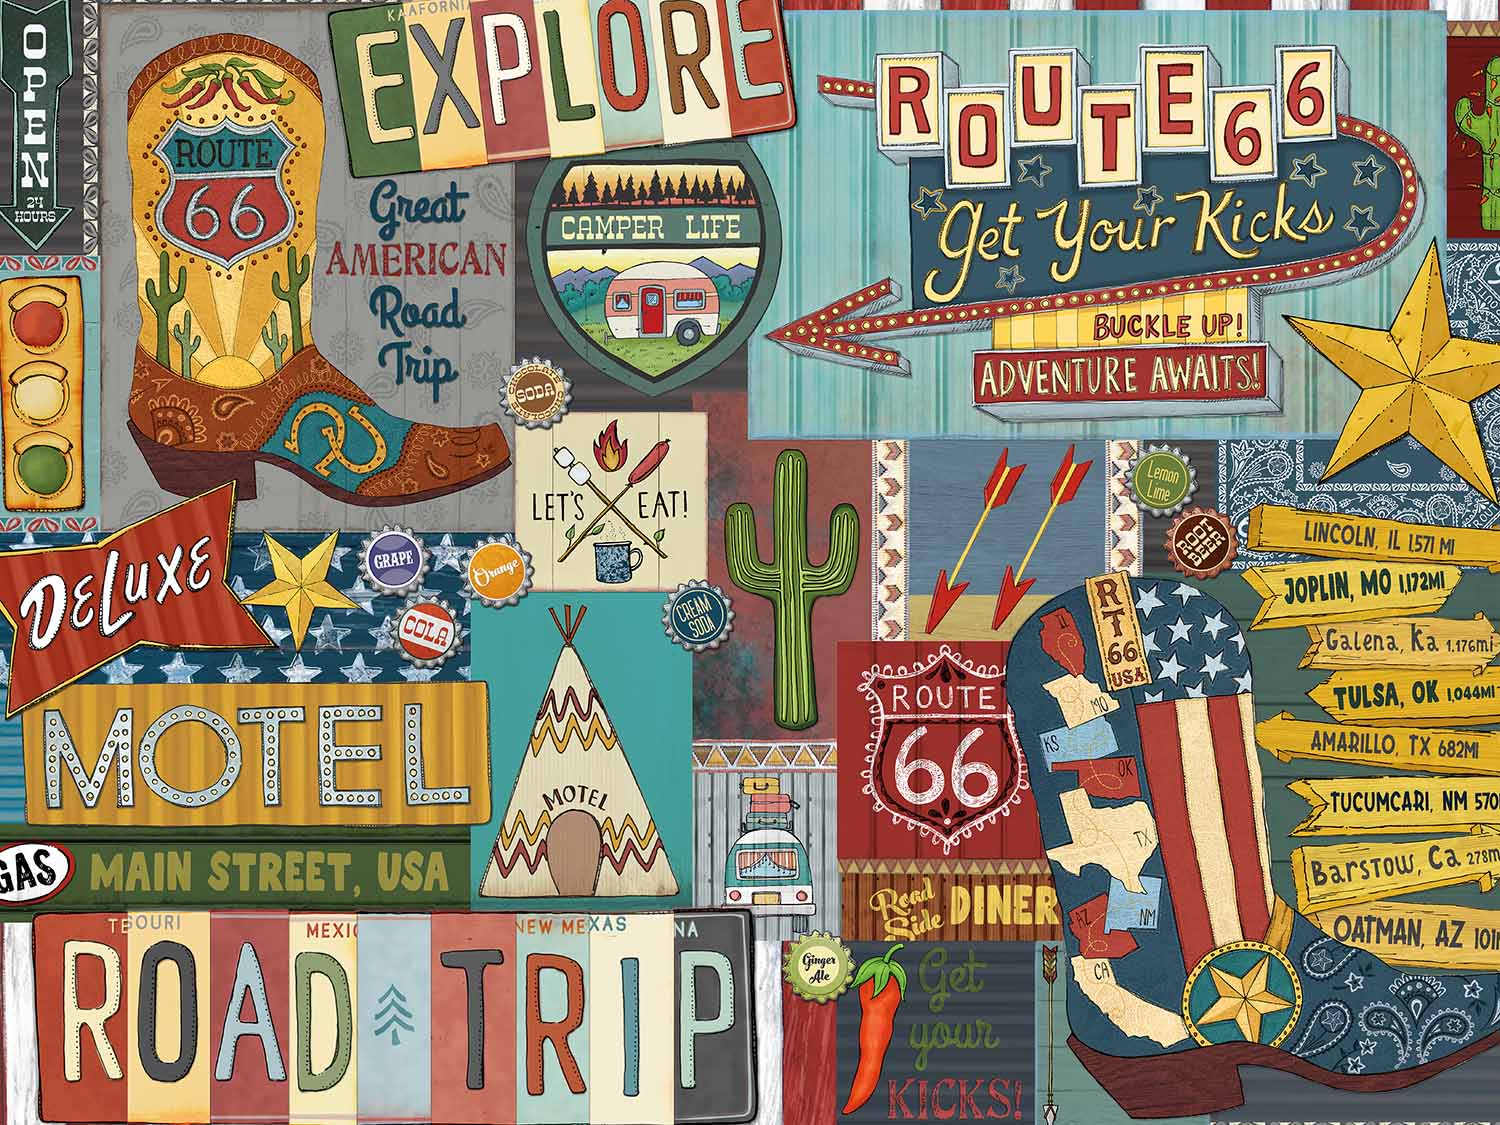 Land of the Free - Route 66 Road Trip Travel Jigsaw Puzzle